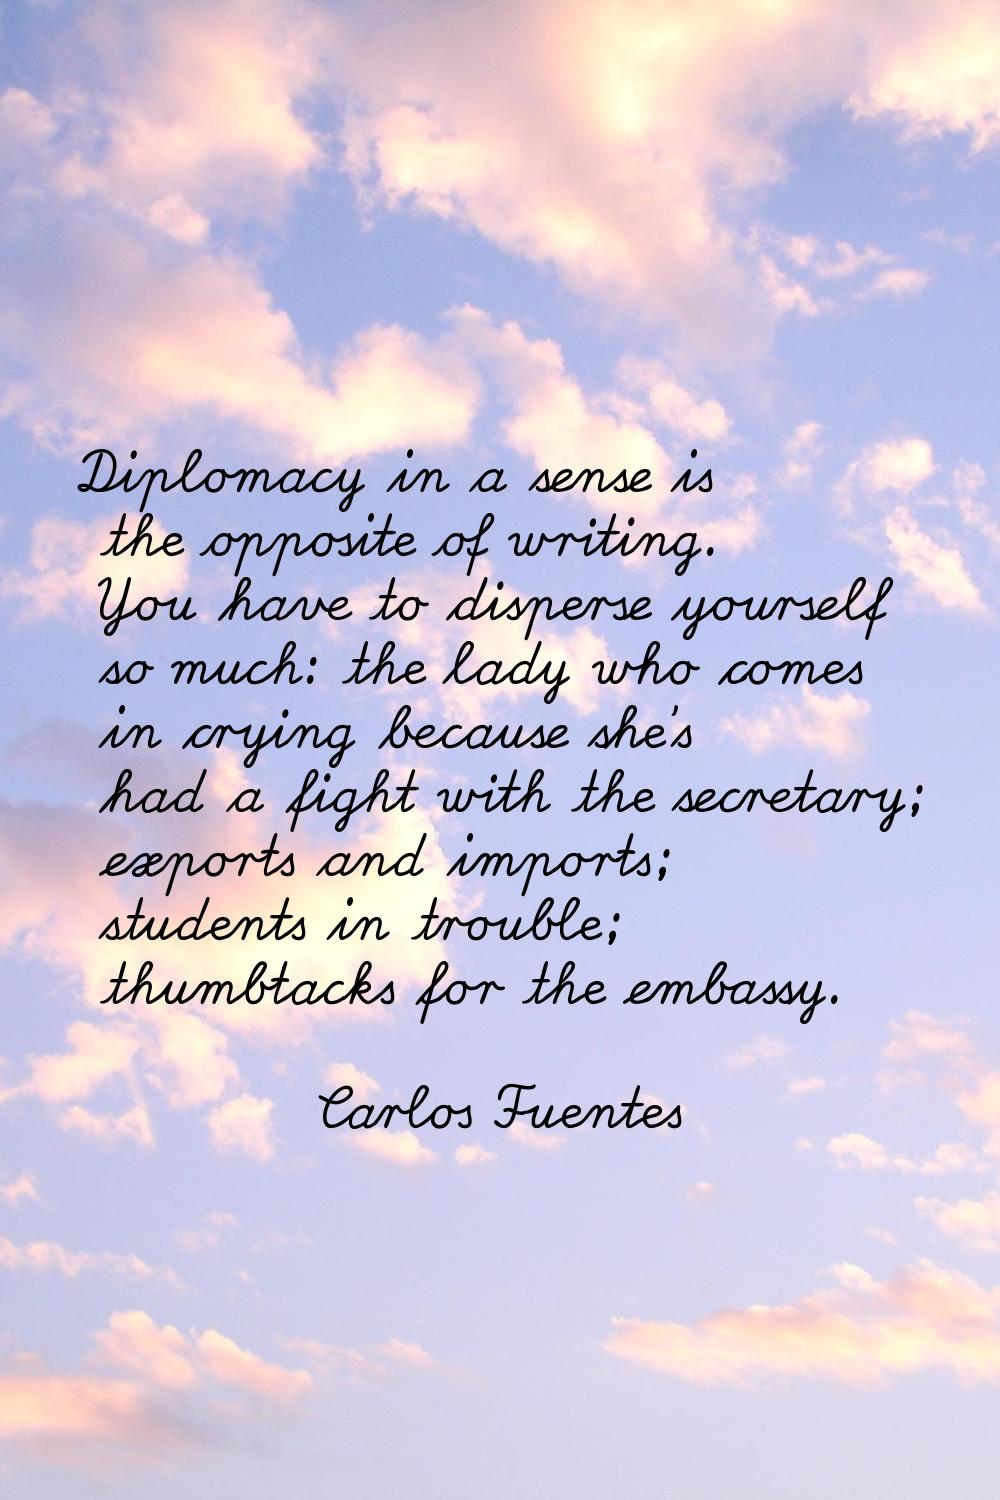 Diplomacy in a sense is the opposite of writing. You have to disperse yourself so much: the lady wh